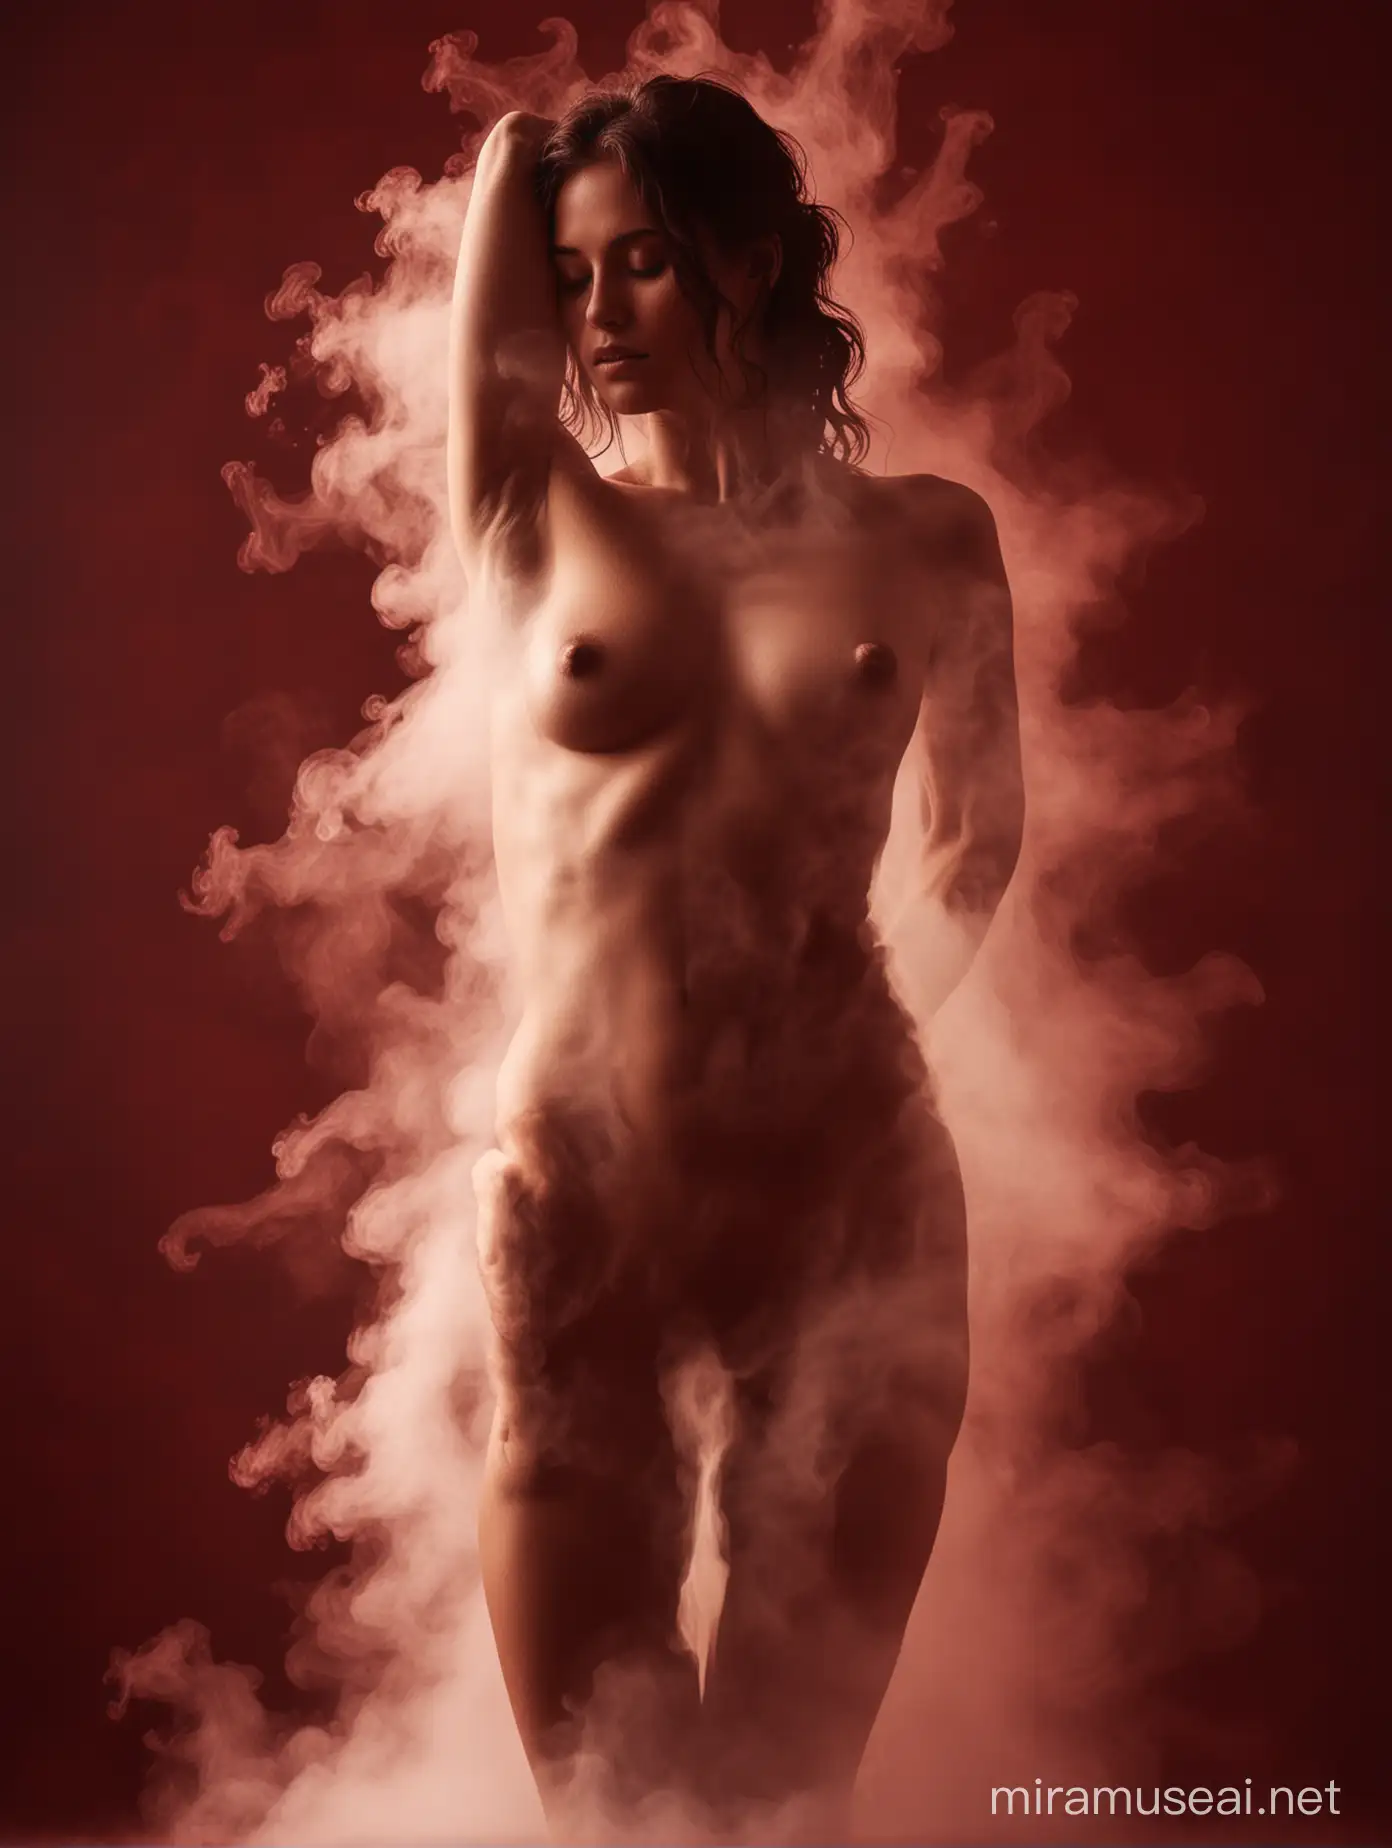 Elegant Nude Silhouette Womans Body Formed by Steam on Dark Red Background